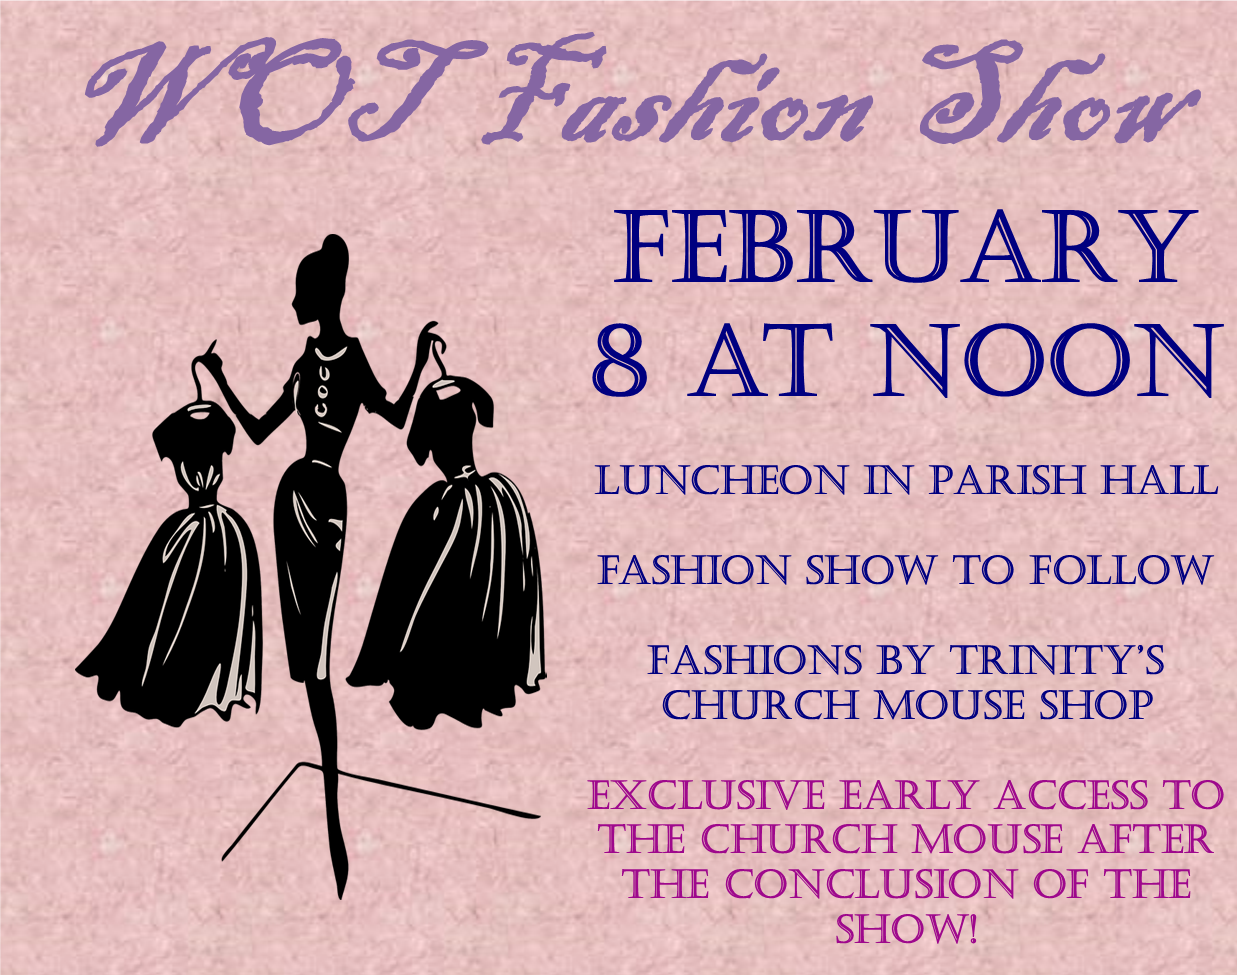 Women of Trinity Fashion Show and Luncheon